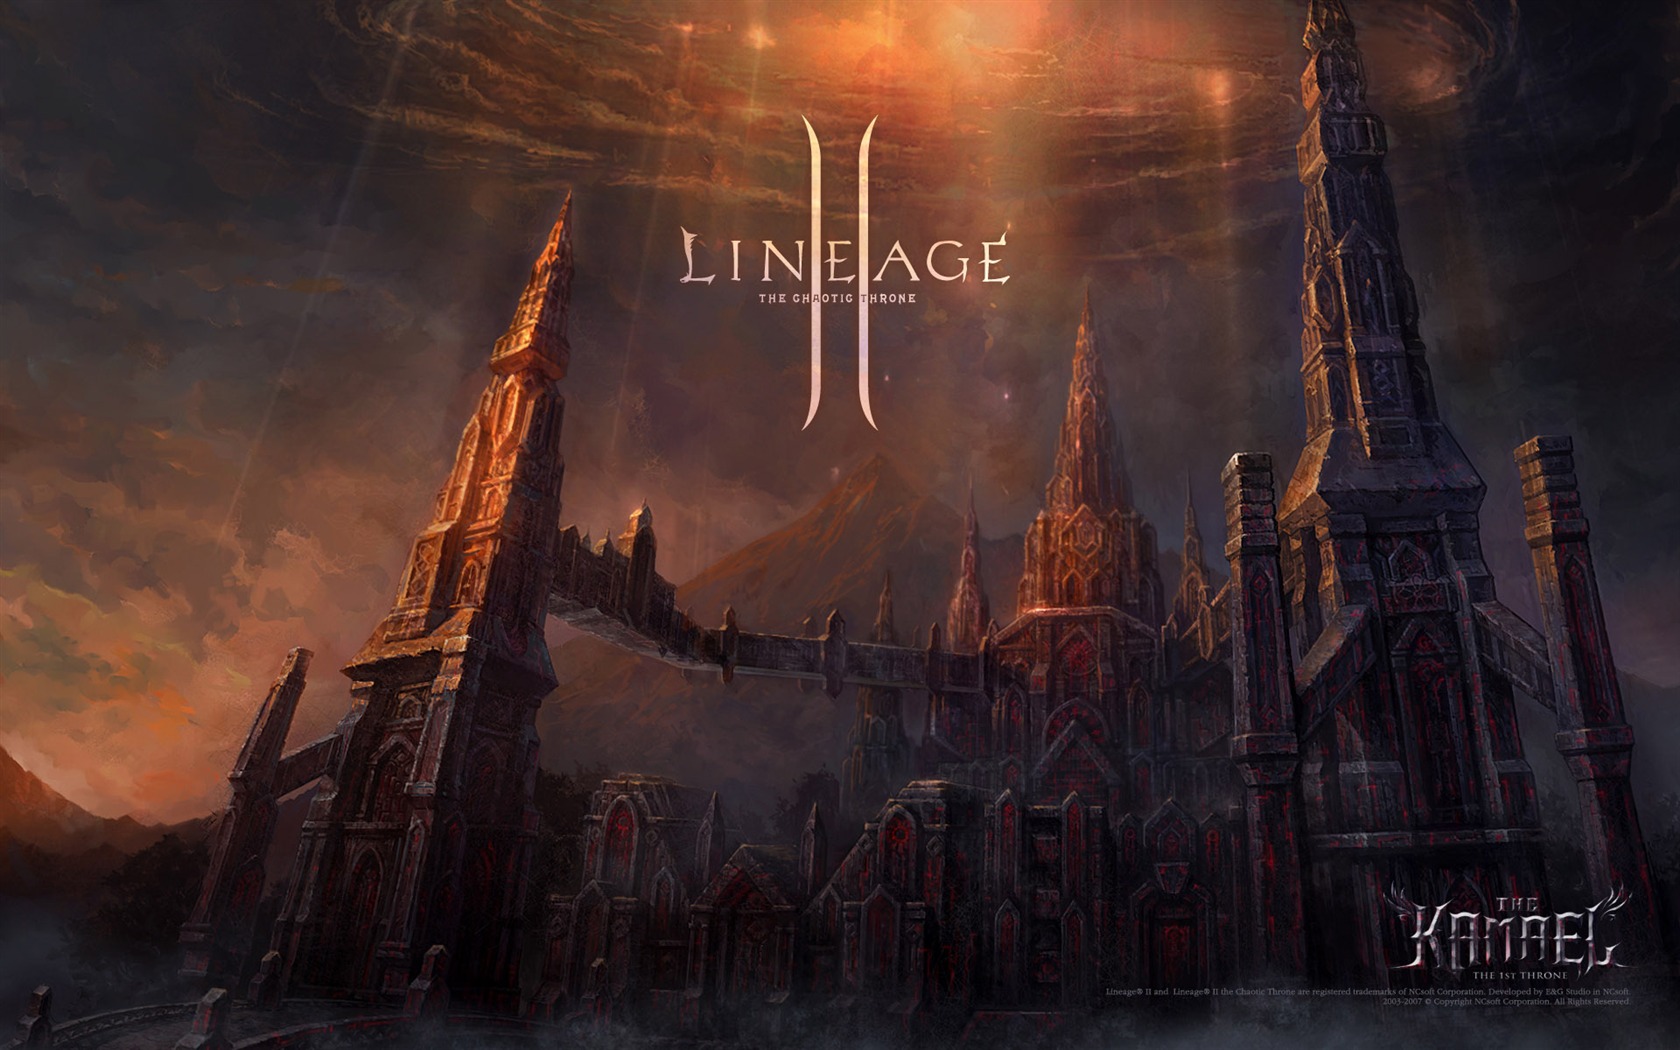 LINEAGE Ⅱ modeling HD gaming wallpapers #4 - 1680x1050